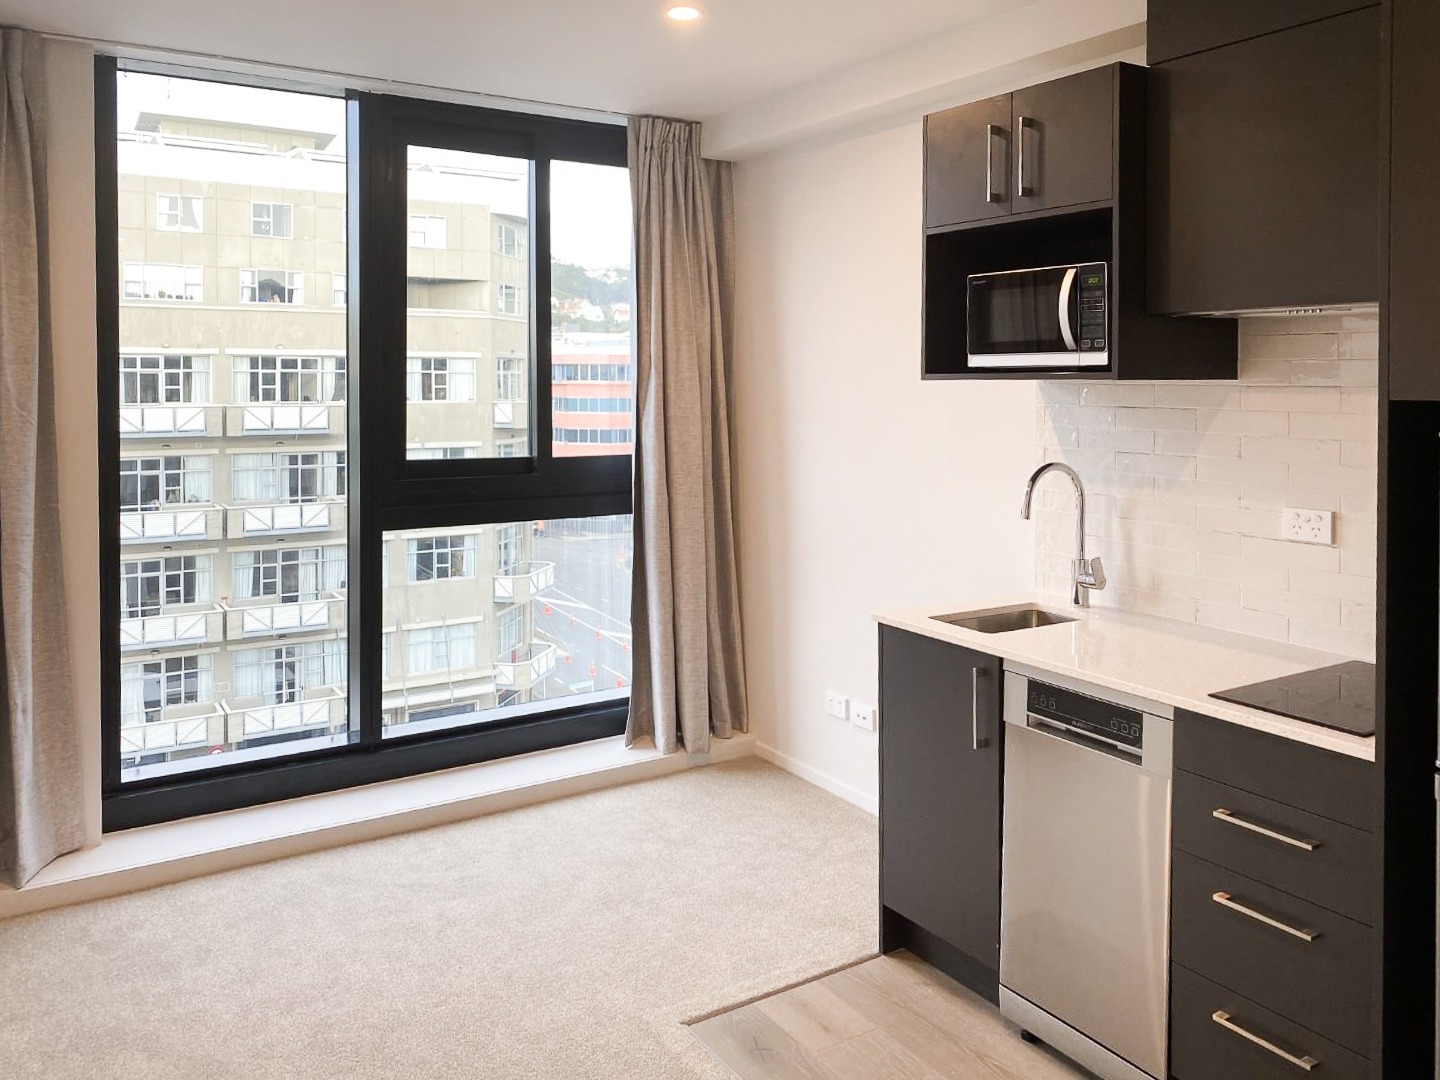 Real Estate For Rent Houses & Apartments : UNFURNISHED 1 Bedroom Studio in central Wellington